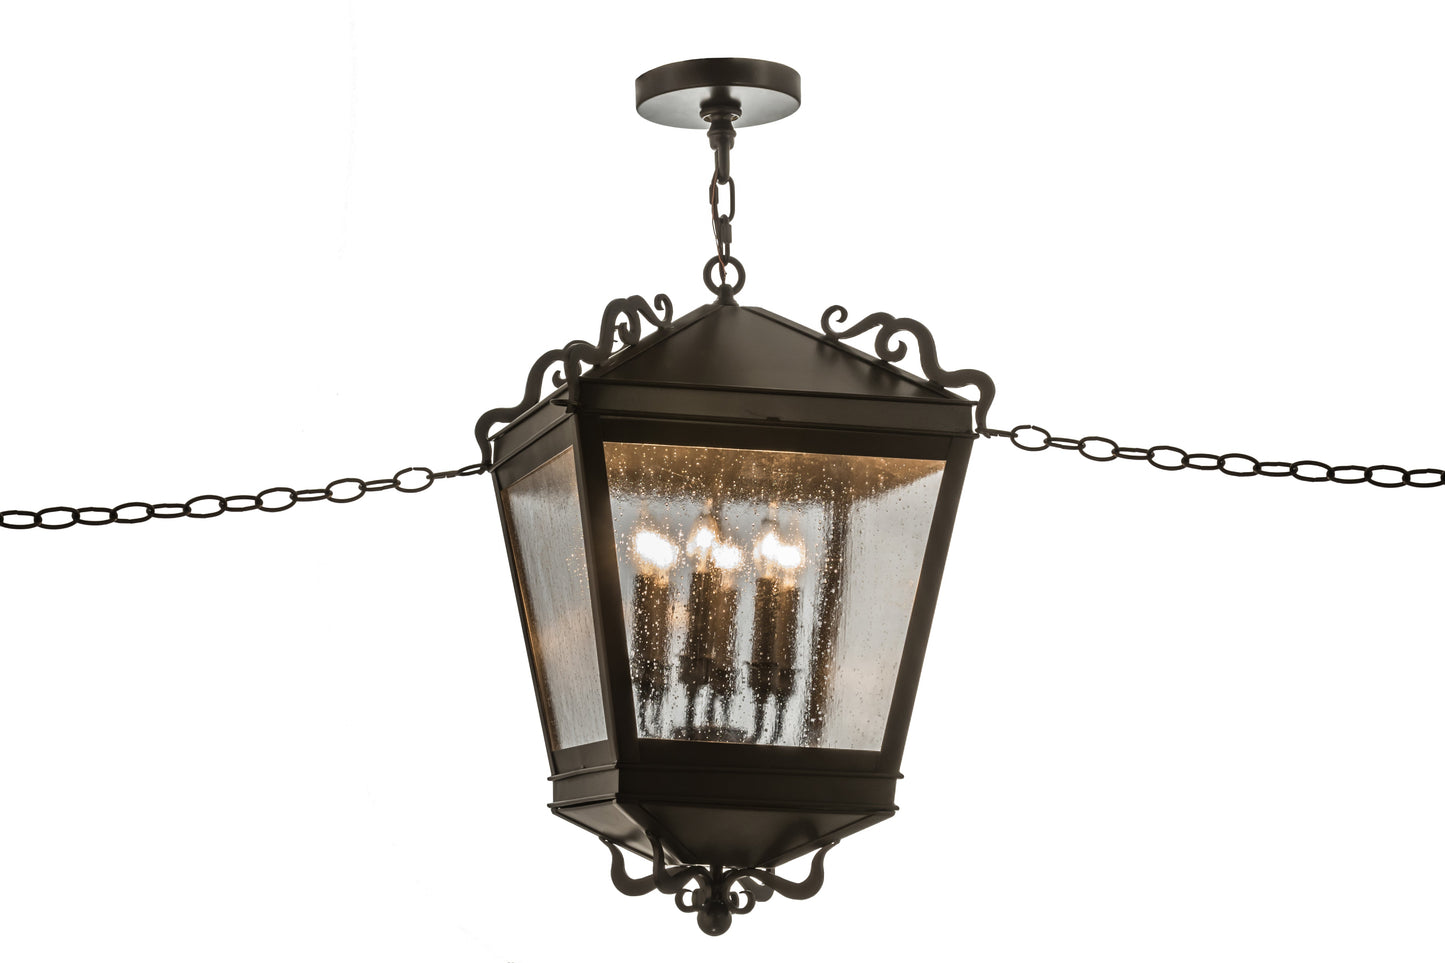 16" Square Madeline Pendant by 2nd Ave Lighting